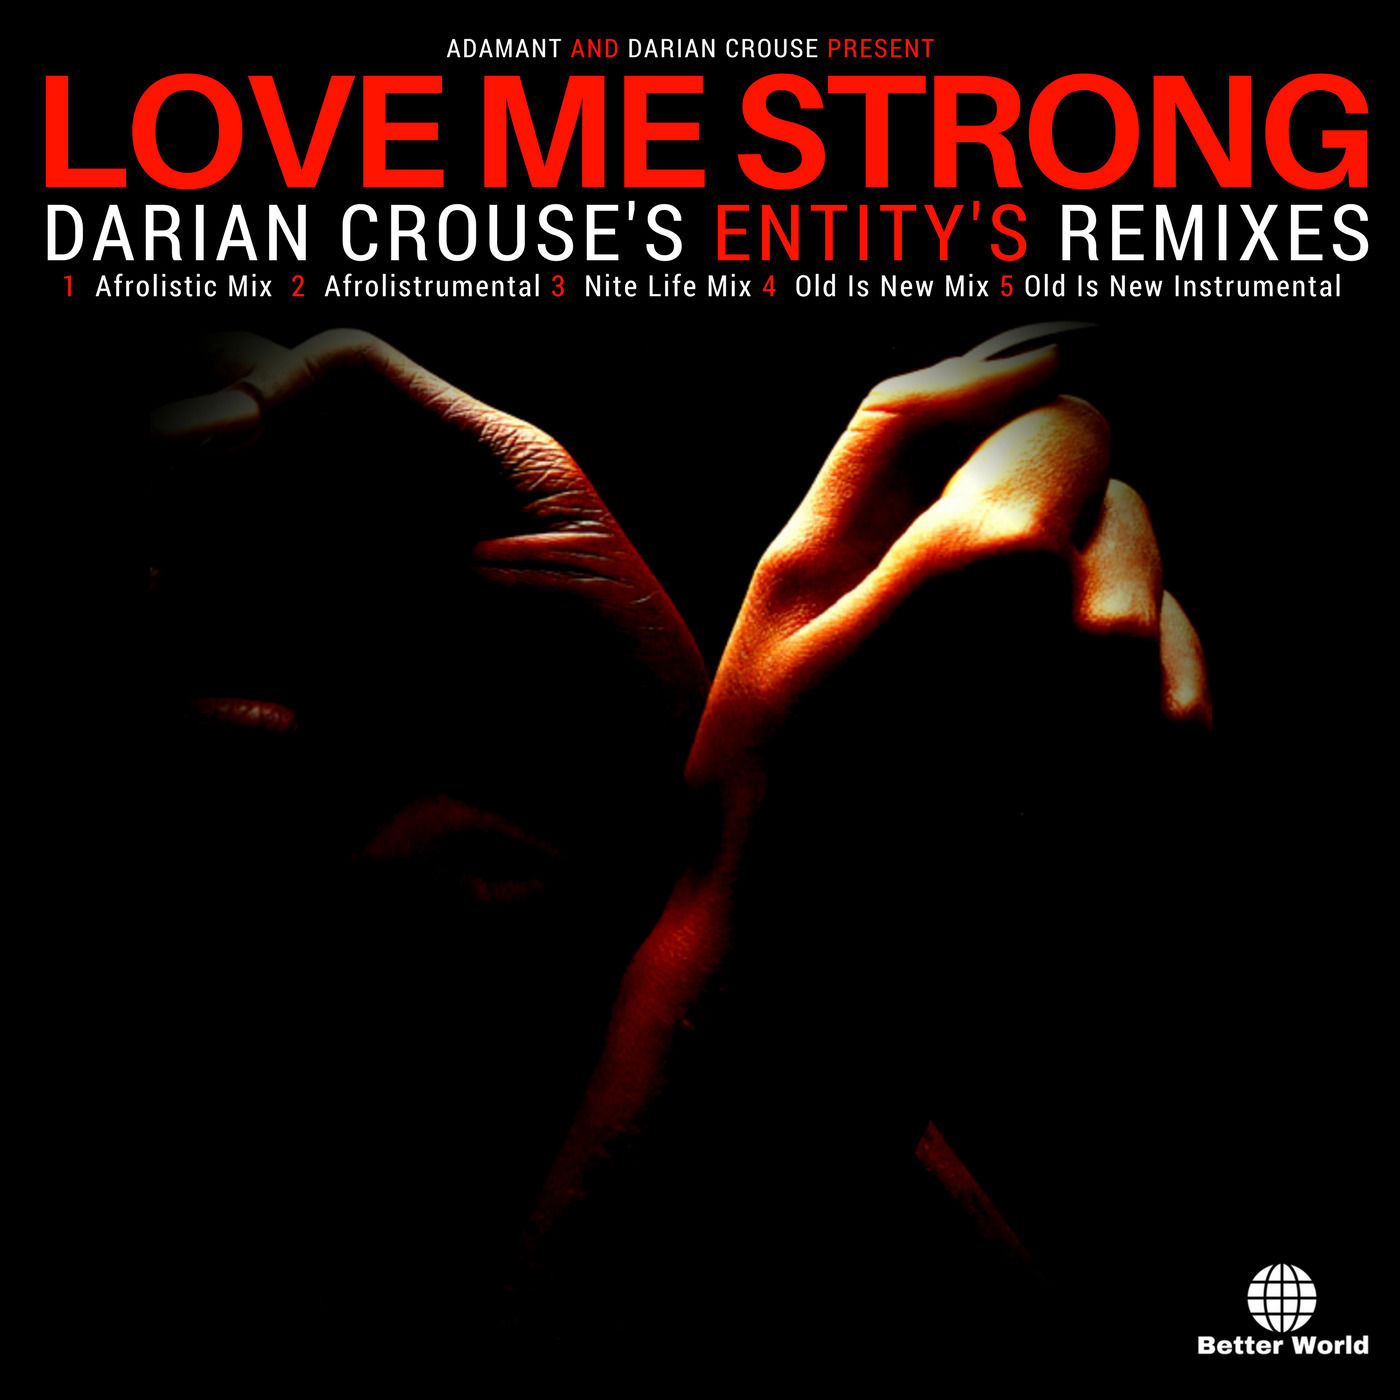 Adamant - Love Me Strong (Darian Crouse Entity's Remixes) / Better World Recordings